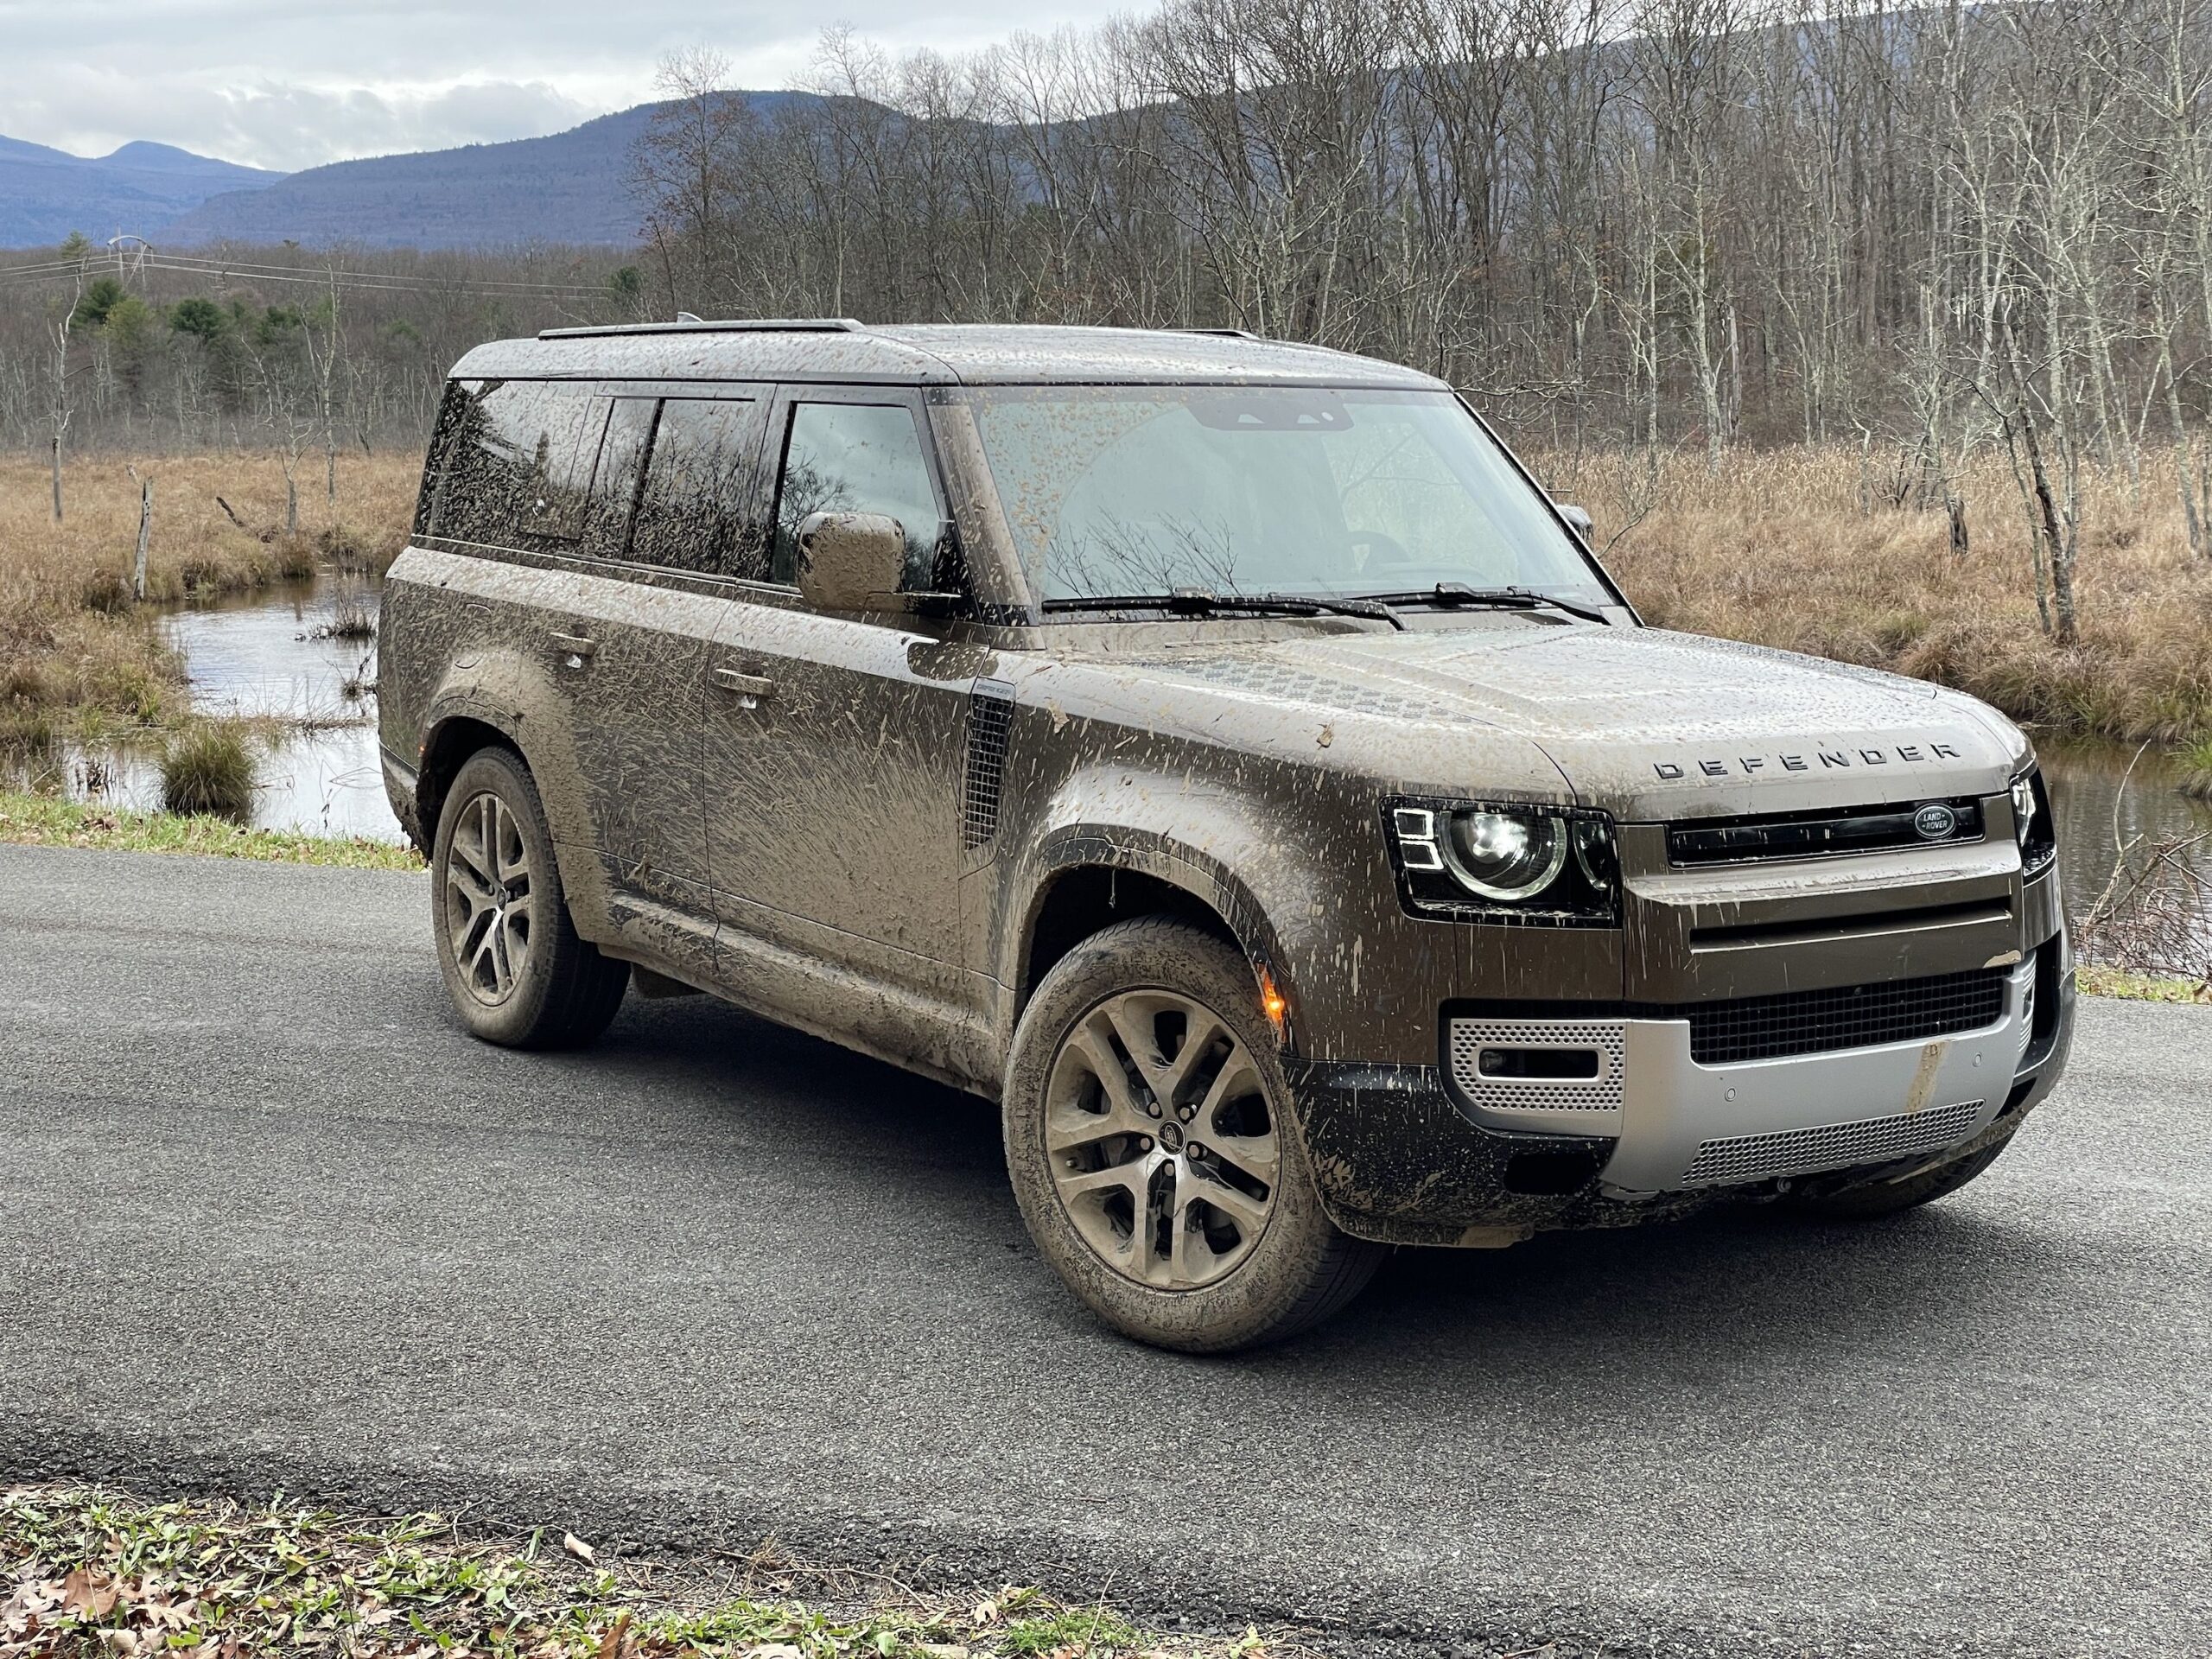 Land Rover: Does it offer 3rd row seating?